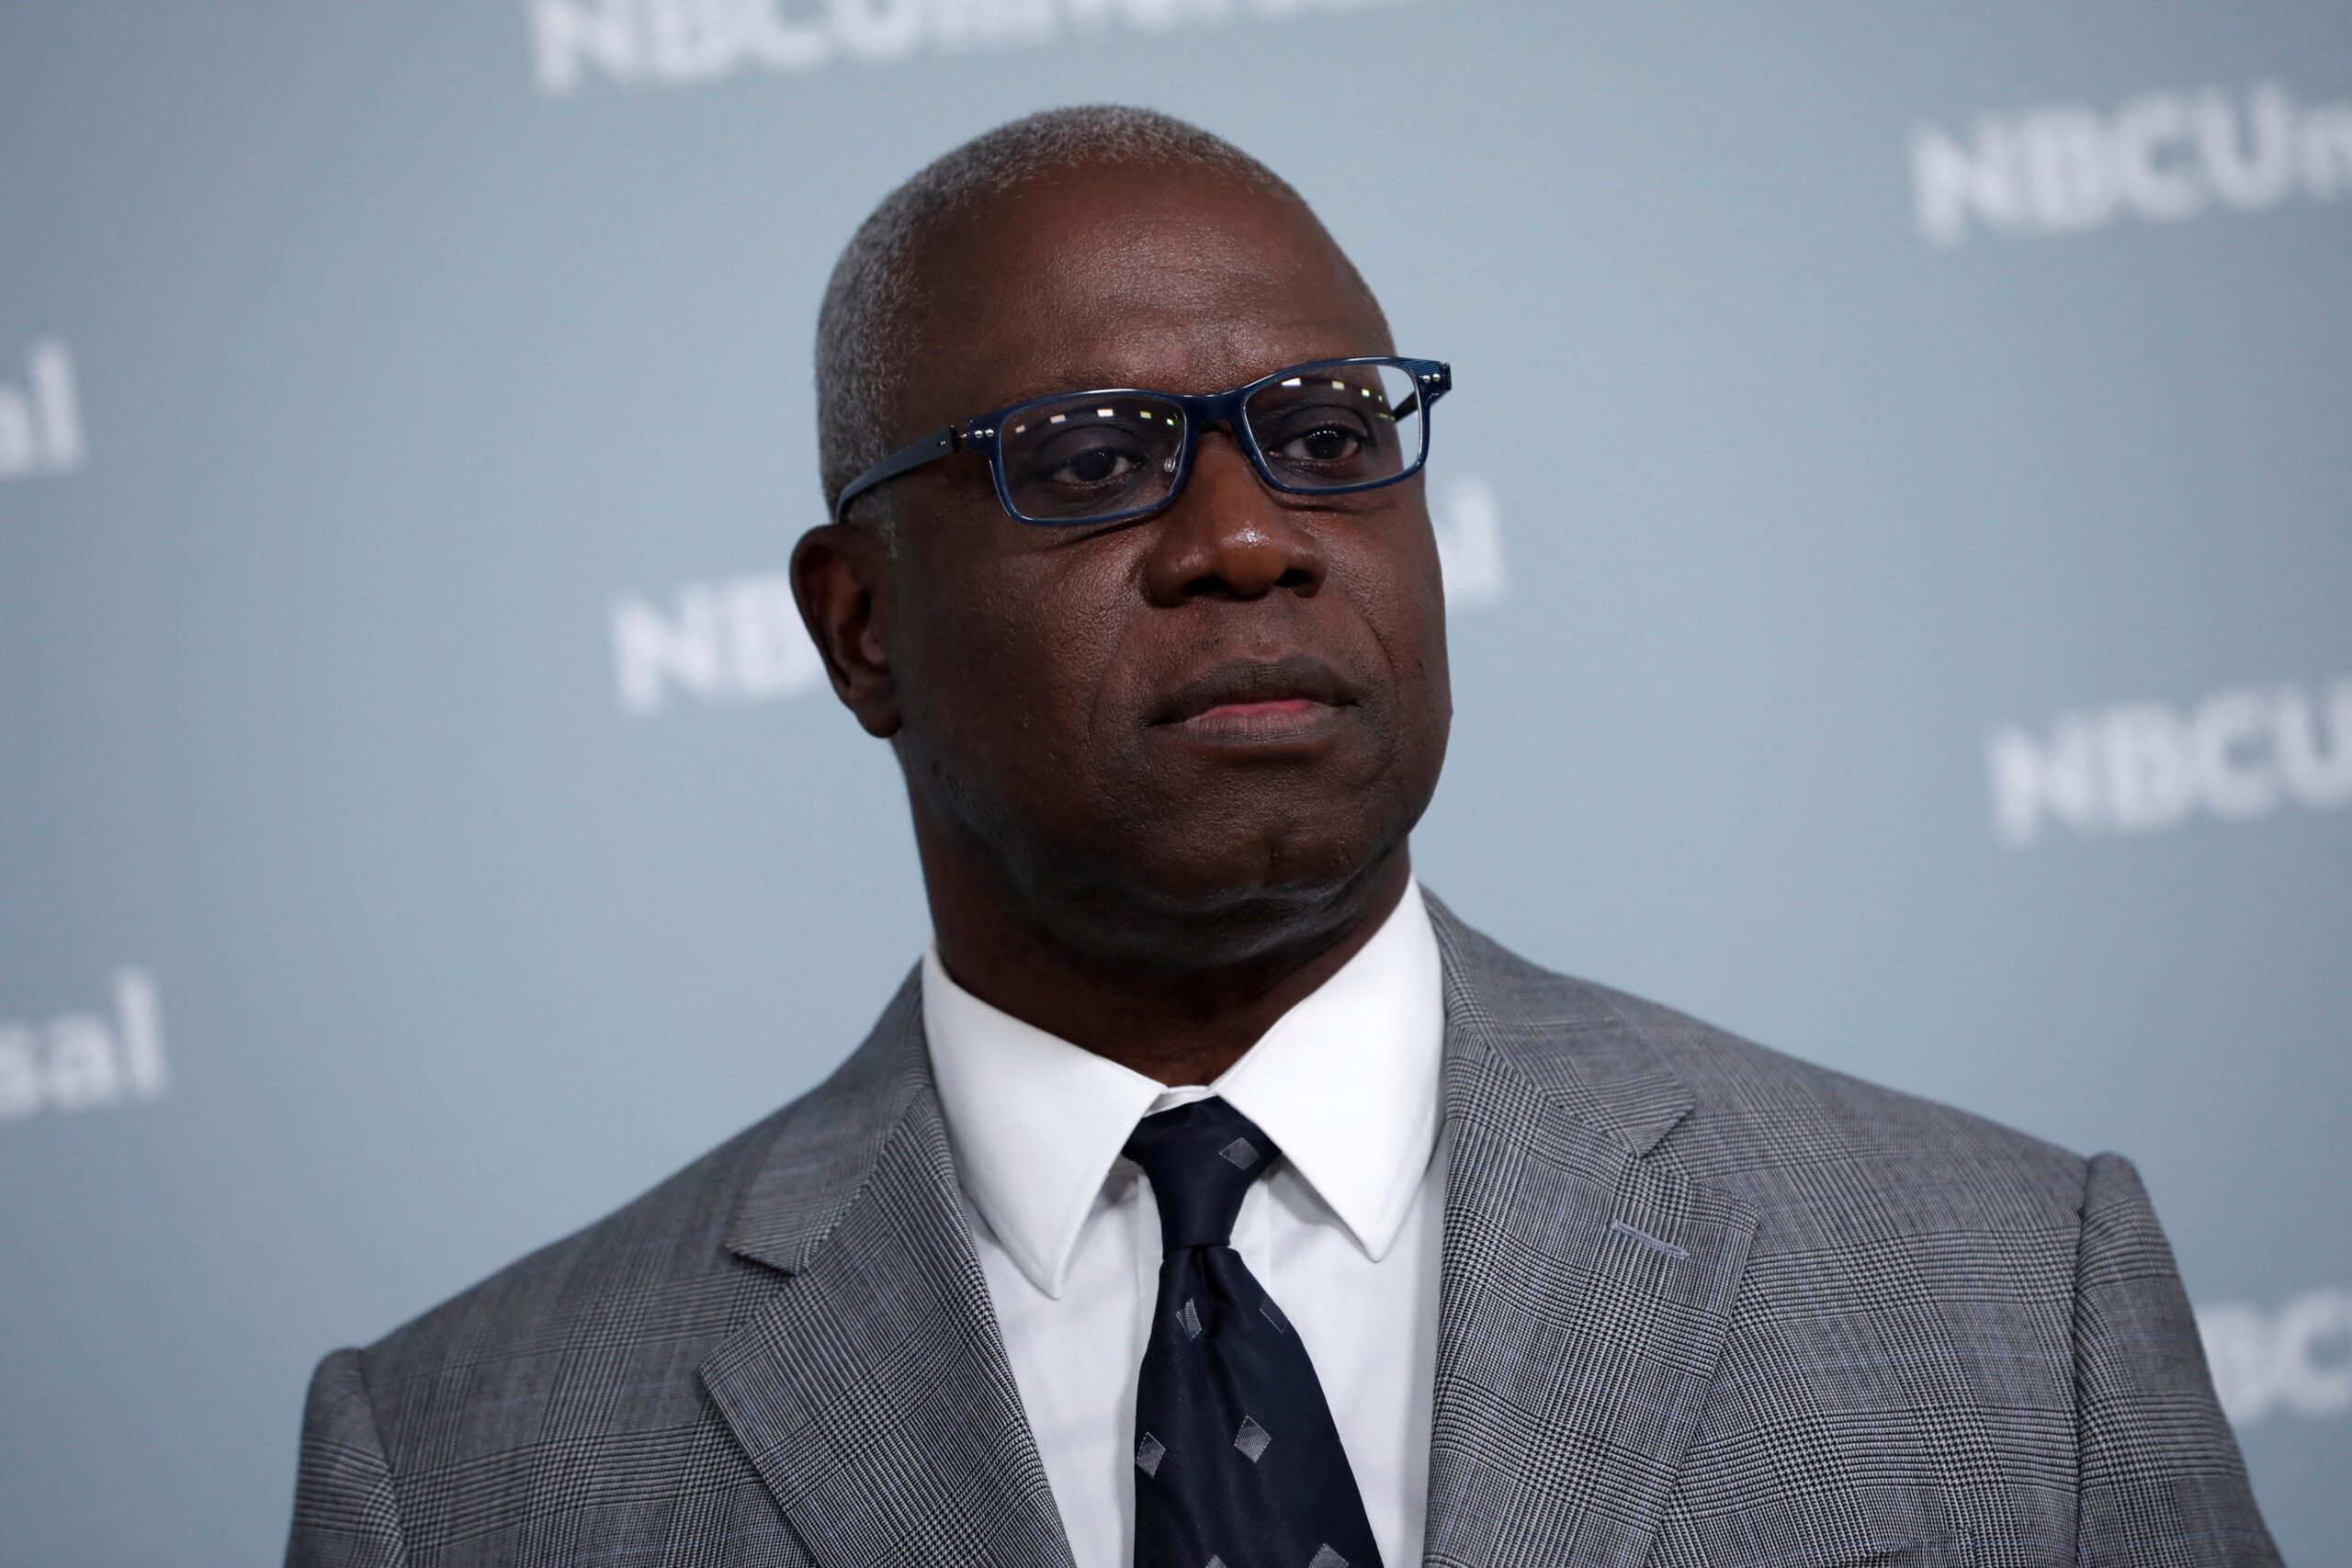 Andre Braugher had been diagnosed with lung cancer months before death – publicist